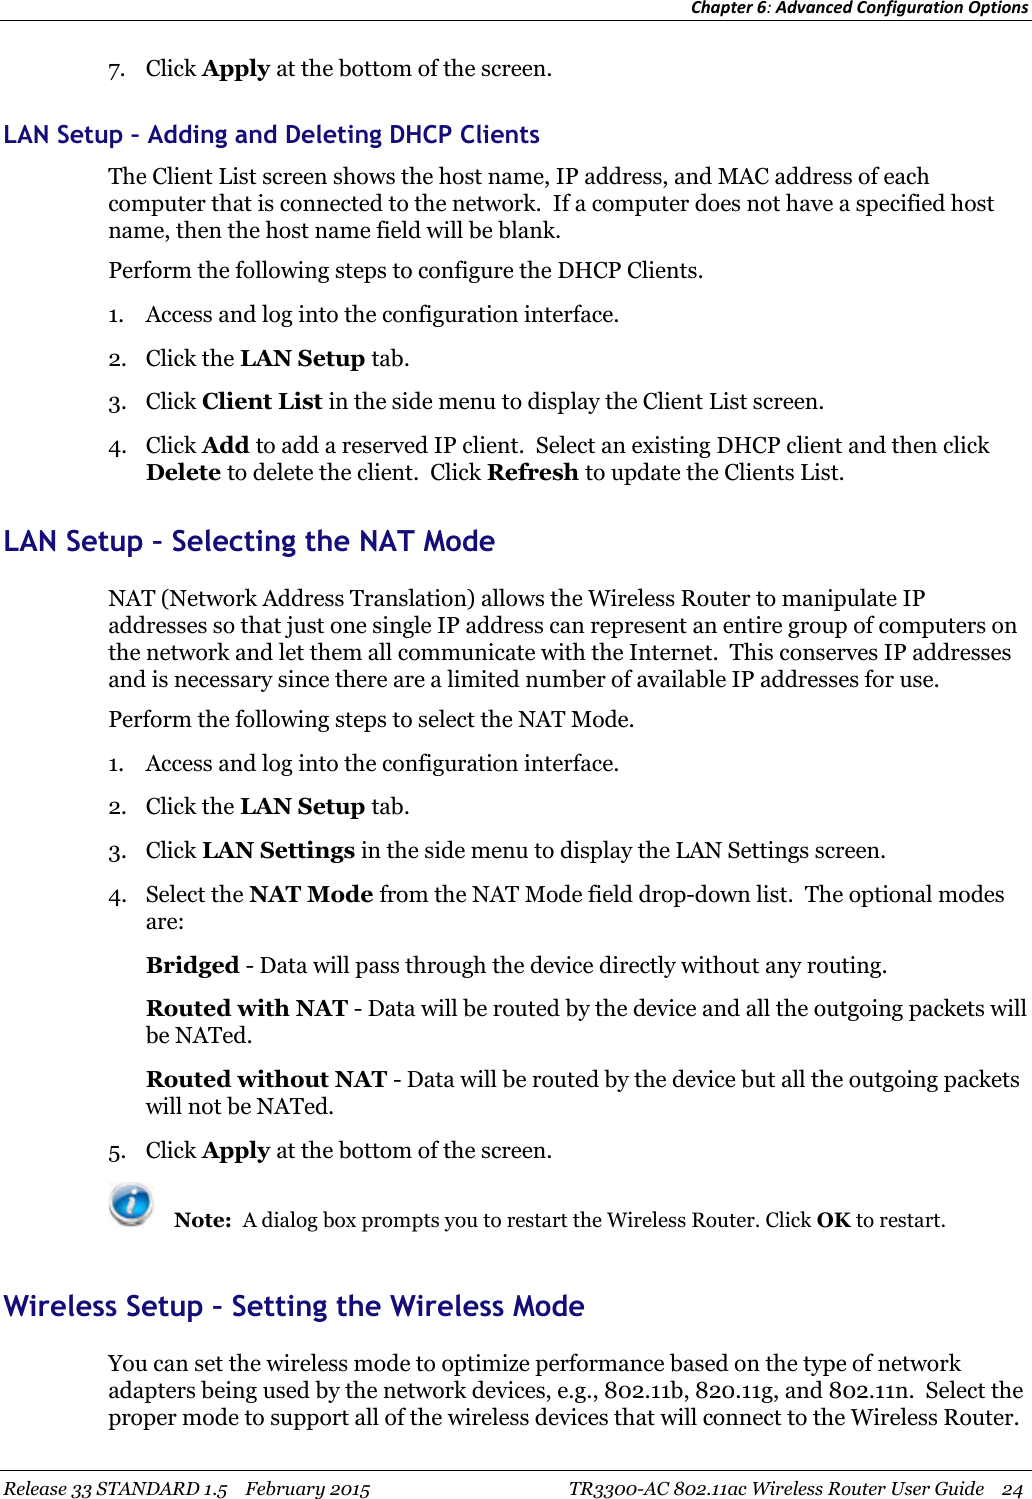 Chapter 6:Advanced Configuration OptionsRelease 33 STANDARD 1.5 February 2015 TR3300-AC 802.11ac Wireless Router User Guide 247. Click Apply at the bottom of the screen.LAN Setup – Adding and Deleting DHCP ClientsThe Client List screen shows the host name, IP address, and MAC address of eachcomputer that is connected to the network. If a computer does not have a specified hostname, then the host name field will be blank.Perform the following steps to configure the DHCP Clients.1. Access and log into the configuration interface.2. Click the LAN Setup tab.3. Click Client List in the side menu to display the Client List screen.4. Click Add to add a reserved IP client. Select an existing DHCP client and then clickDelete to delete the client. Click Refresh to update the Clients List.LAN Setup – Selecting the NAT ModeNAT (Network Address Translation) allows the Wireless Router to manipulate IPaddresses so that just one single IP address can represent an entire group of computers onthe network and let them all communicate with the Internet. This conserves IP addressesand is necessary since there are a limited number of available IP addresses for use.Perform the following steps to select the NAT Mode.1. Access and log into the configuration interface.2. Click the LAN Setup tab.3. Click LAN Settings in the side menu to display the LAN Settings screen.4. Select the NAT Mode from the NAT Mode field drop-down list. The optional modesare:Bridged - Data will pass through the device directly without any routing.Routed with NAT - Data will be routed by the device and all the outgoing packets willbe NATed.Routed without NAT - Data will be routed by the device but all the outgoing packetswill not be NATed.5. Click Apply at the bottom of the screen.Note: A dialog box prompts you to restart the Wireless Router. Click OK to restart.Wireless Setup – Setting the Wireless ModeYou can set the wireless mode to optimize performance based on the type of networkadapters being used by the network devices, e.g., 802.11b, 820.11g, and 802.11n. Select theproper mode to support all of the wireless devices that will connect to the Wireless Router.